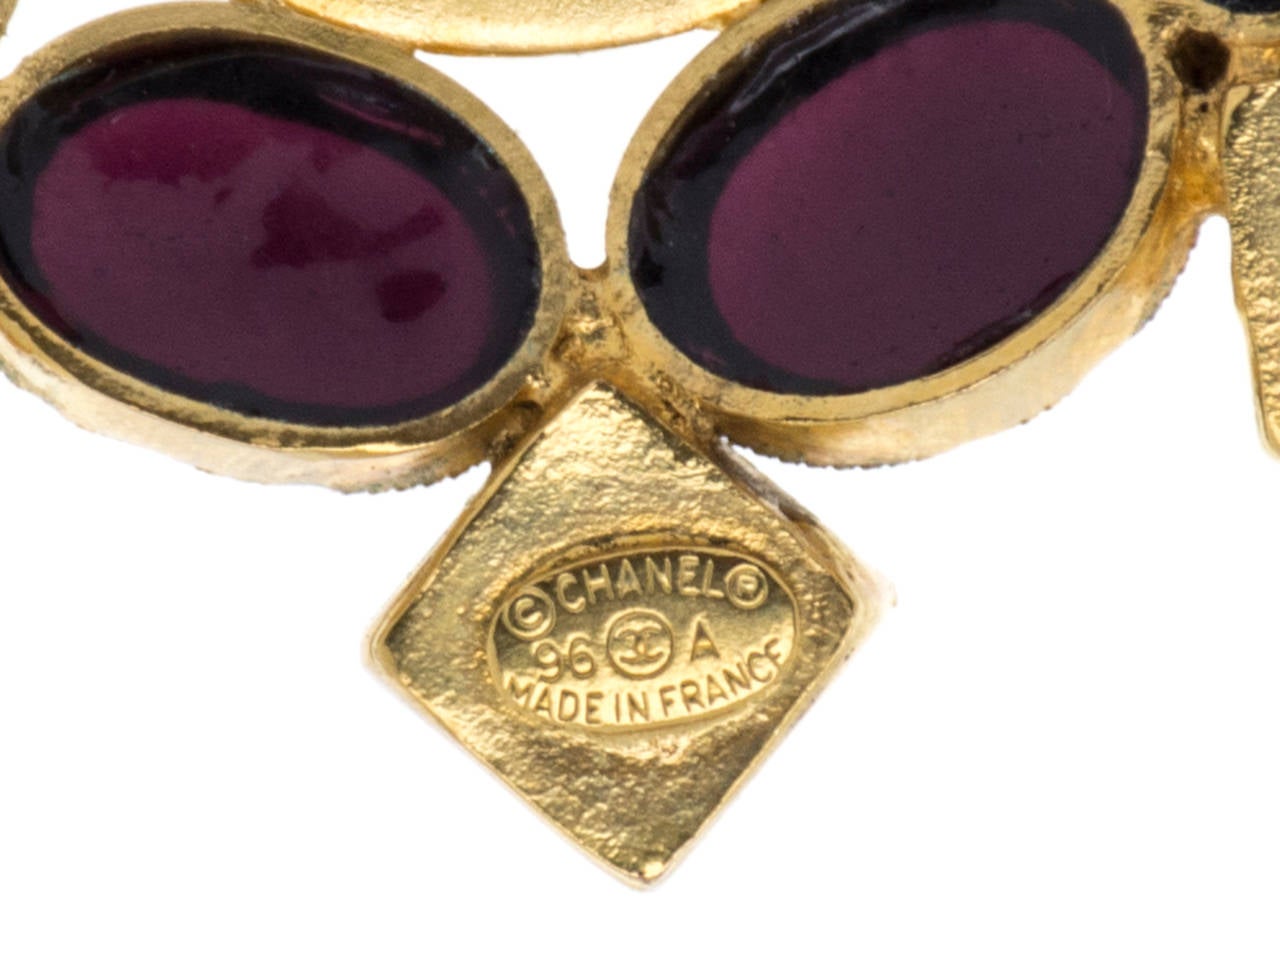 Chanel Vintage Glass Brooch In Excellent Condition For Sale In Vista, CA